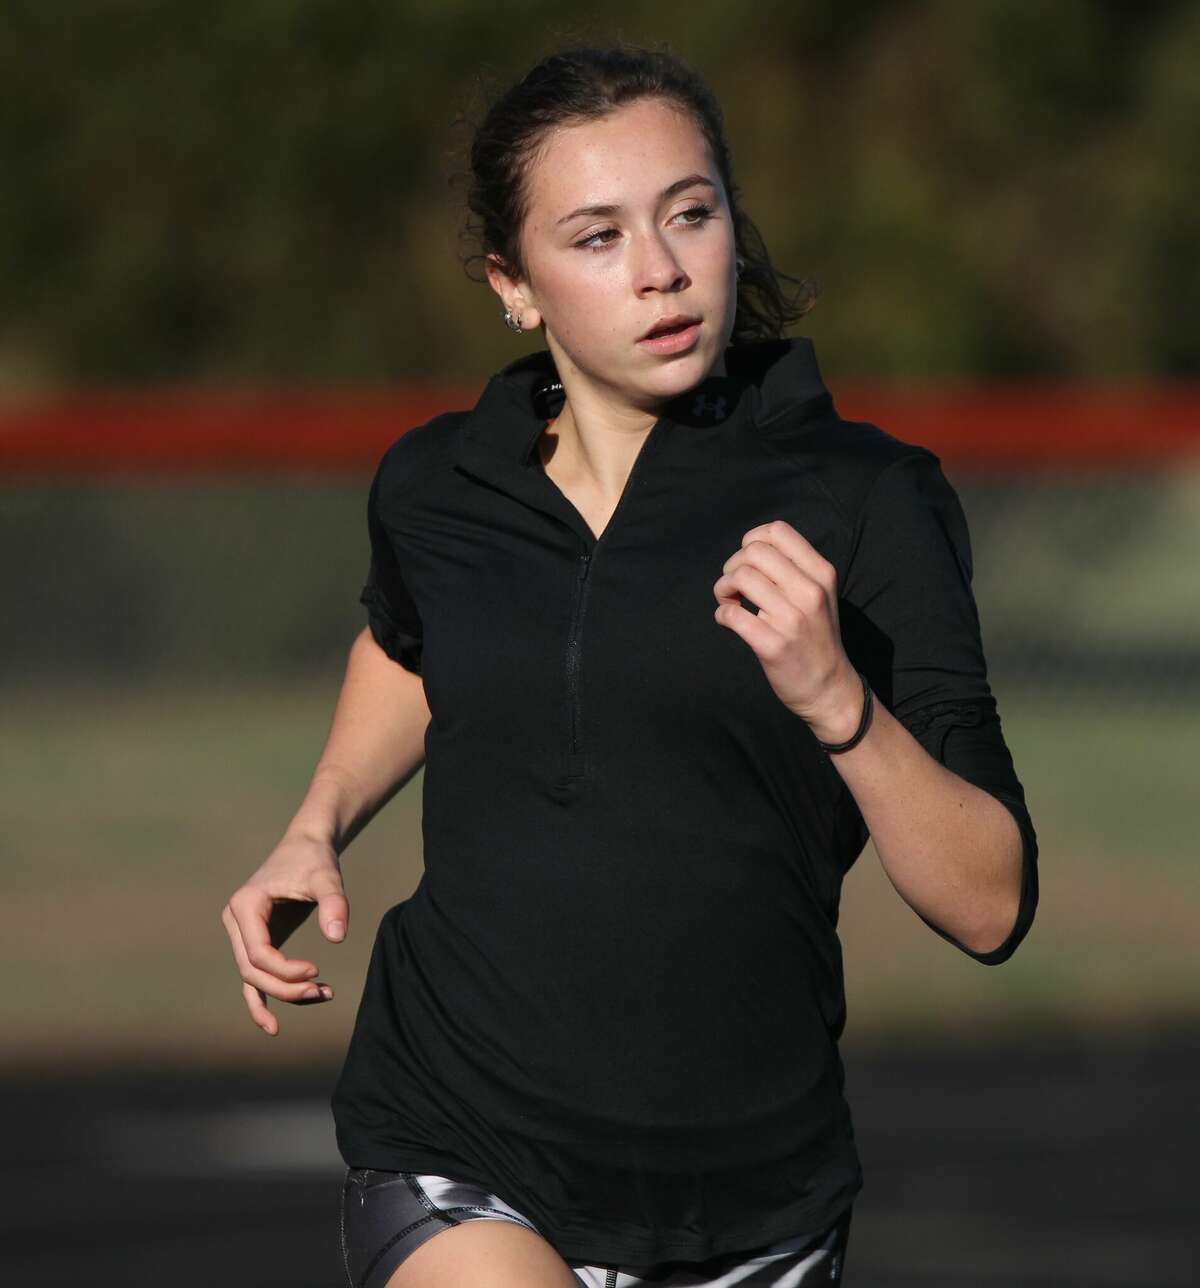 South County's Madigan Burger works out at the New Berlin track Thursday in preparation for Saturday's IHSA Cross Country State Final Meet.